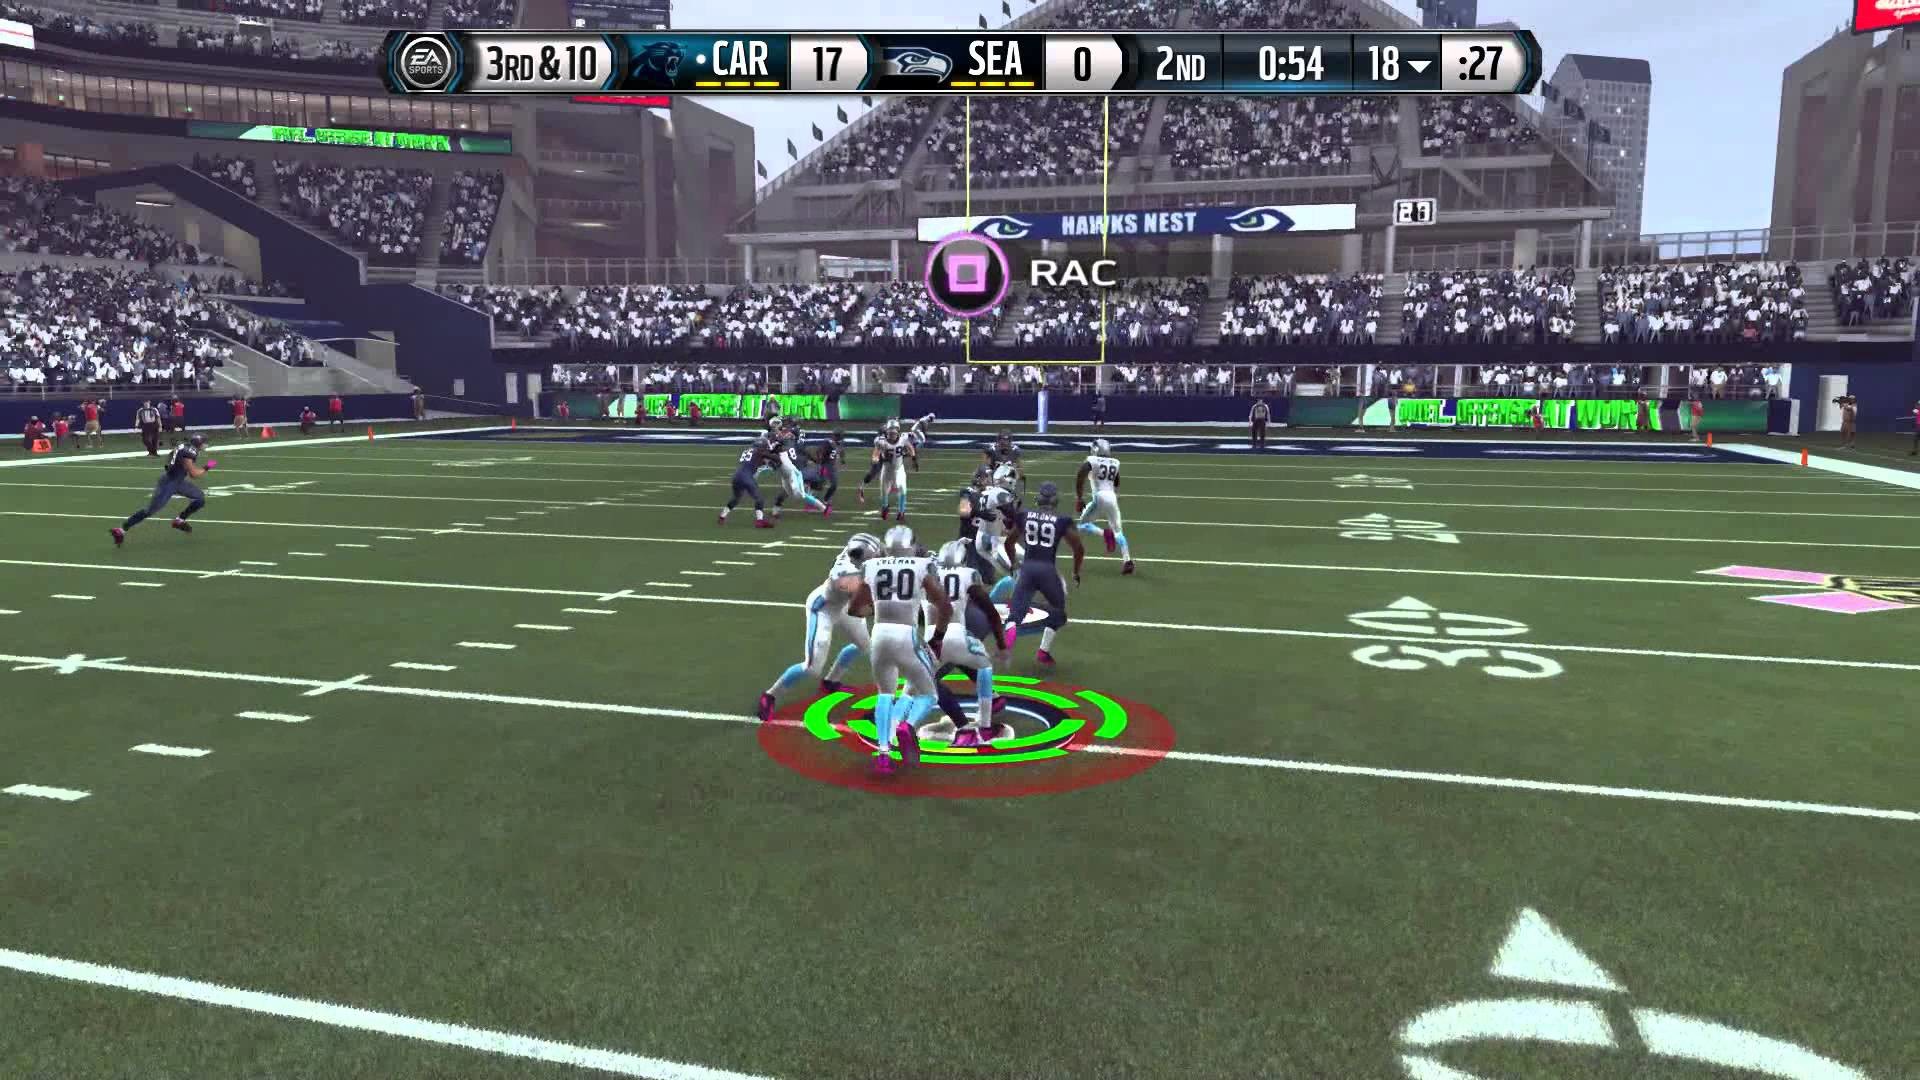 1920x1080 Madden 16 Jerry Rice Seahawks Career Mode Ep 7 vs Panthers